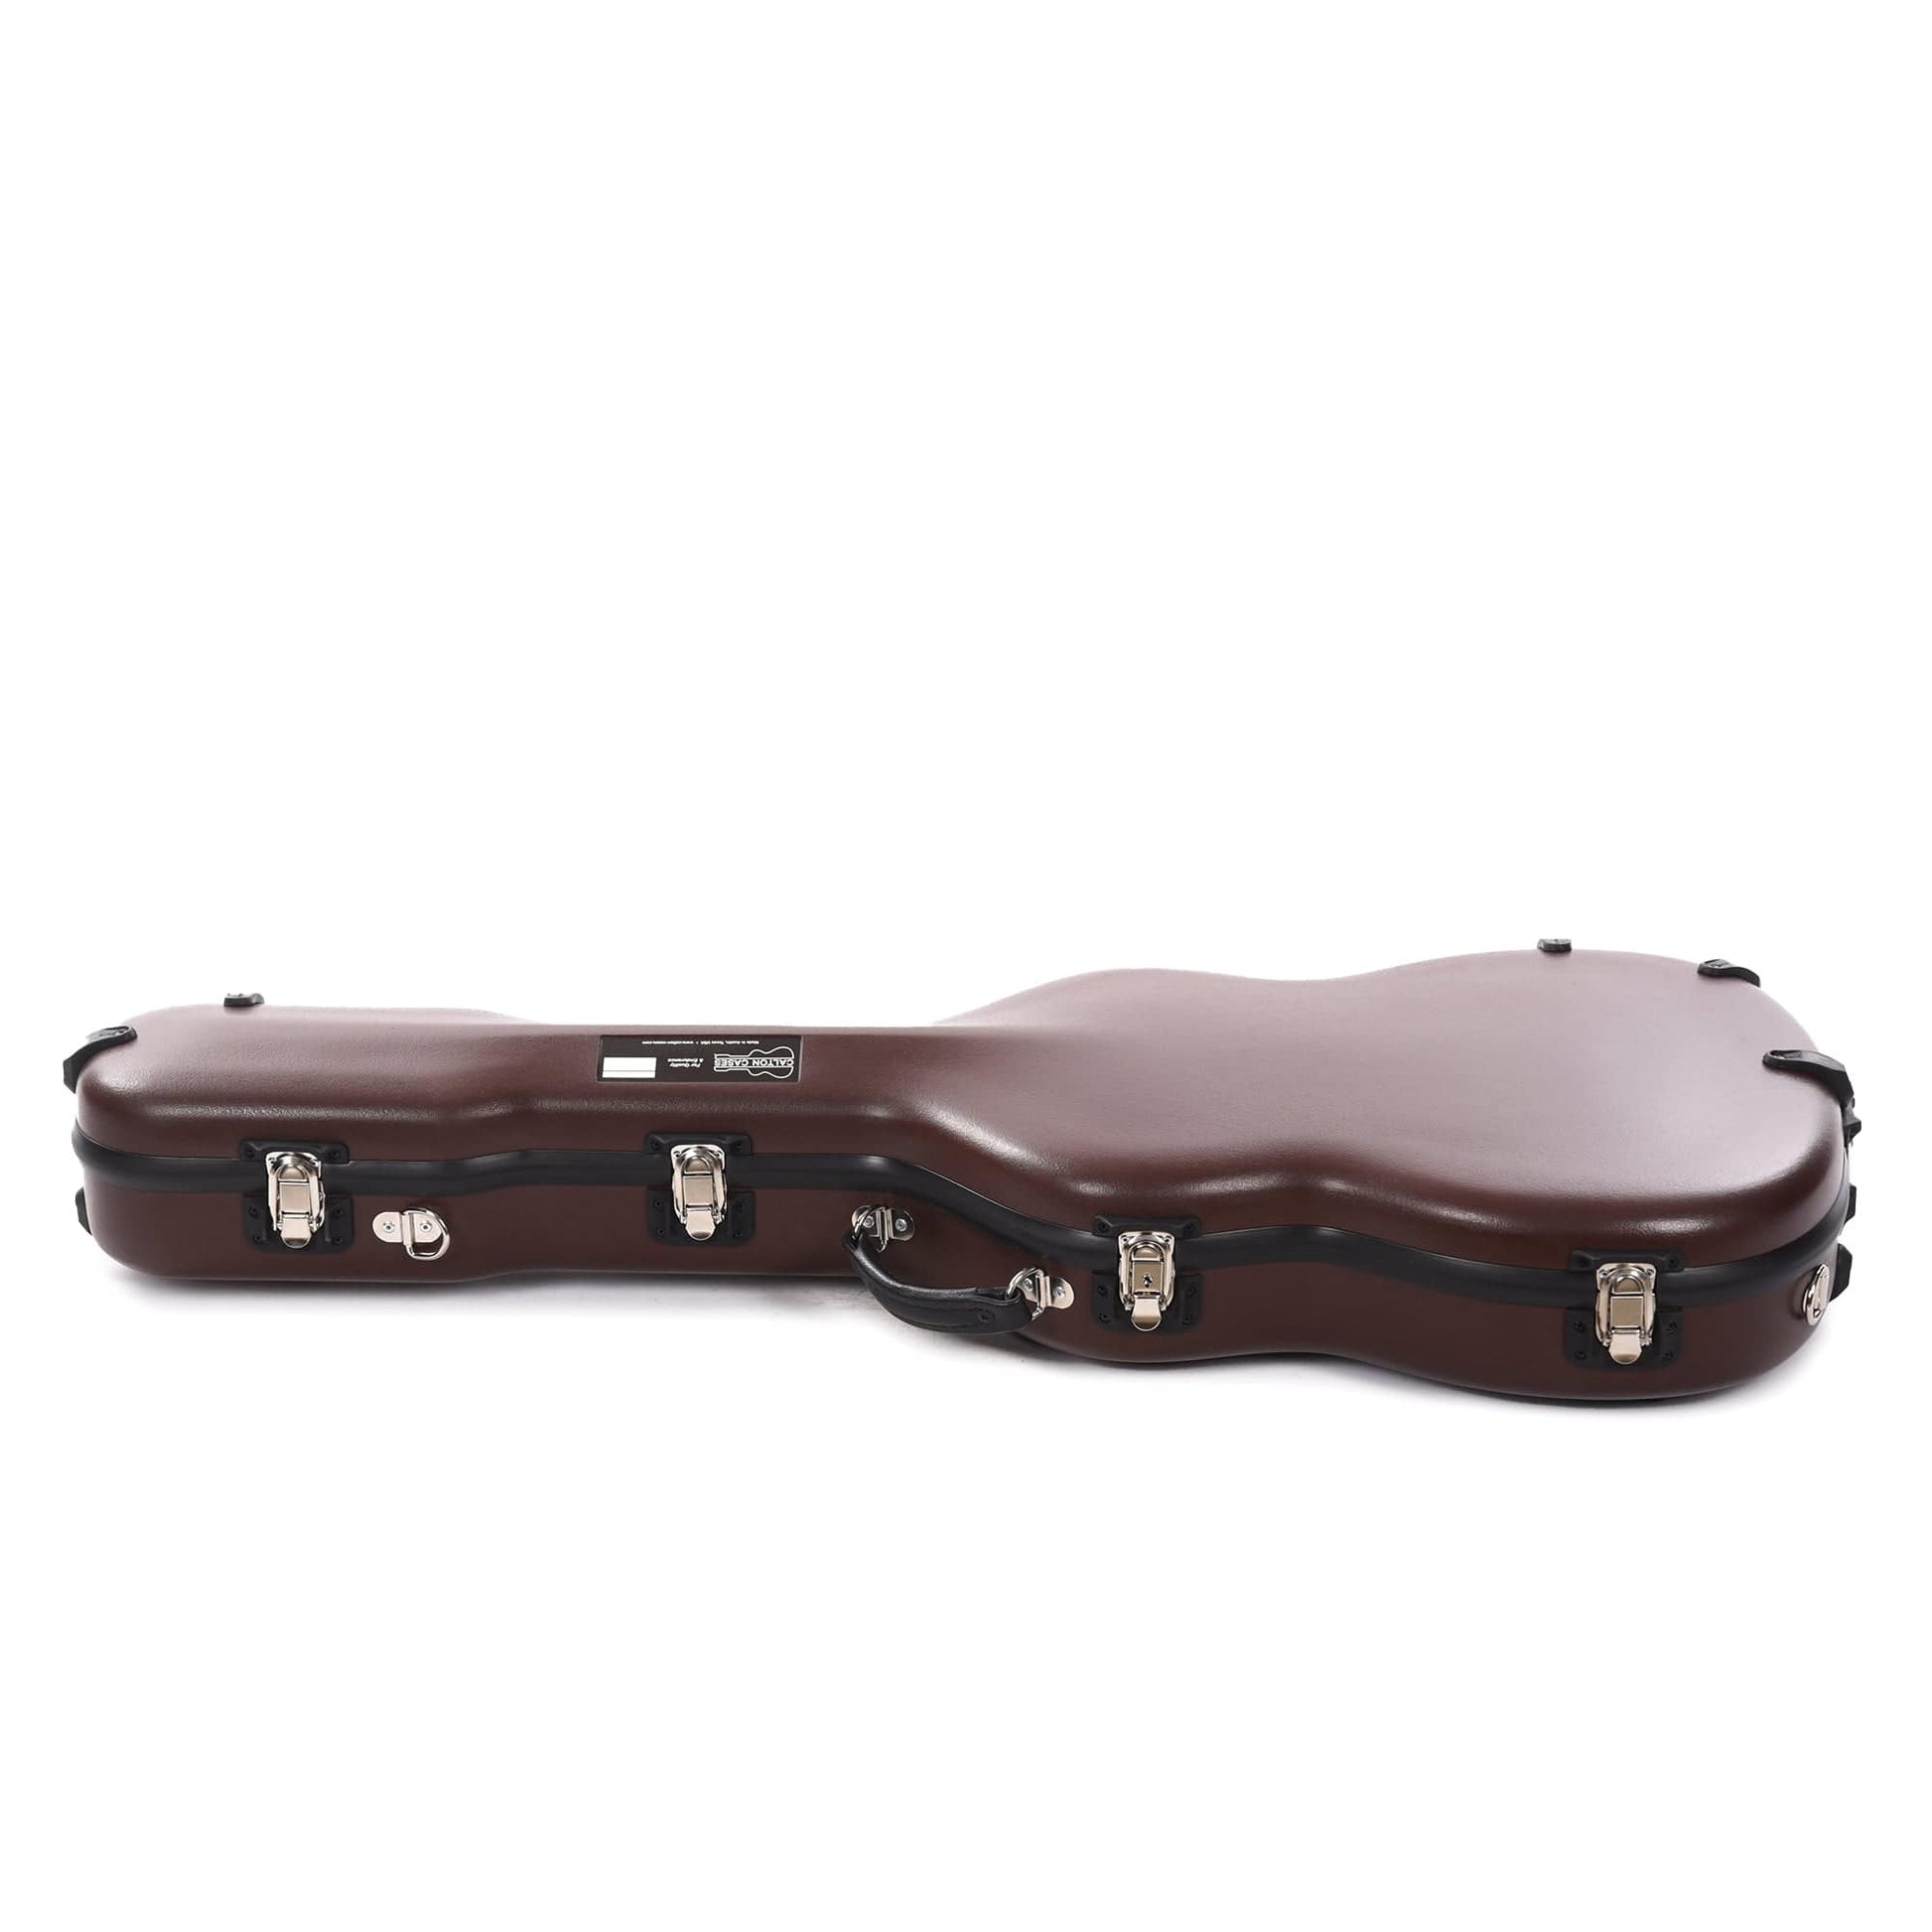 Calton Cases Electric Stratocaster Guitar Case Brown w/Gold Velvet Interior Accessories / Cases and Gig Bags / Guitar Cases